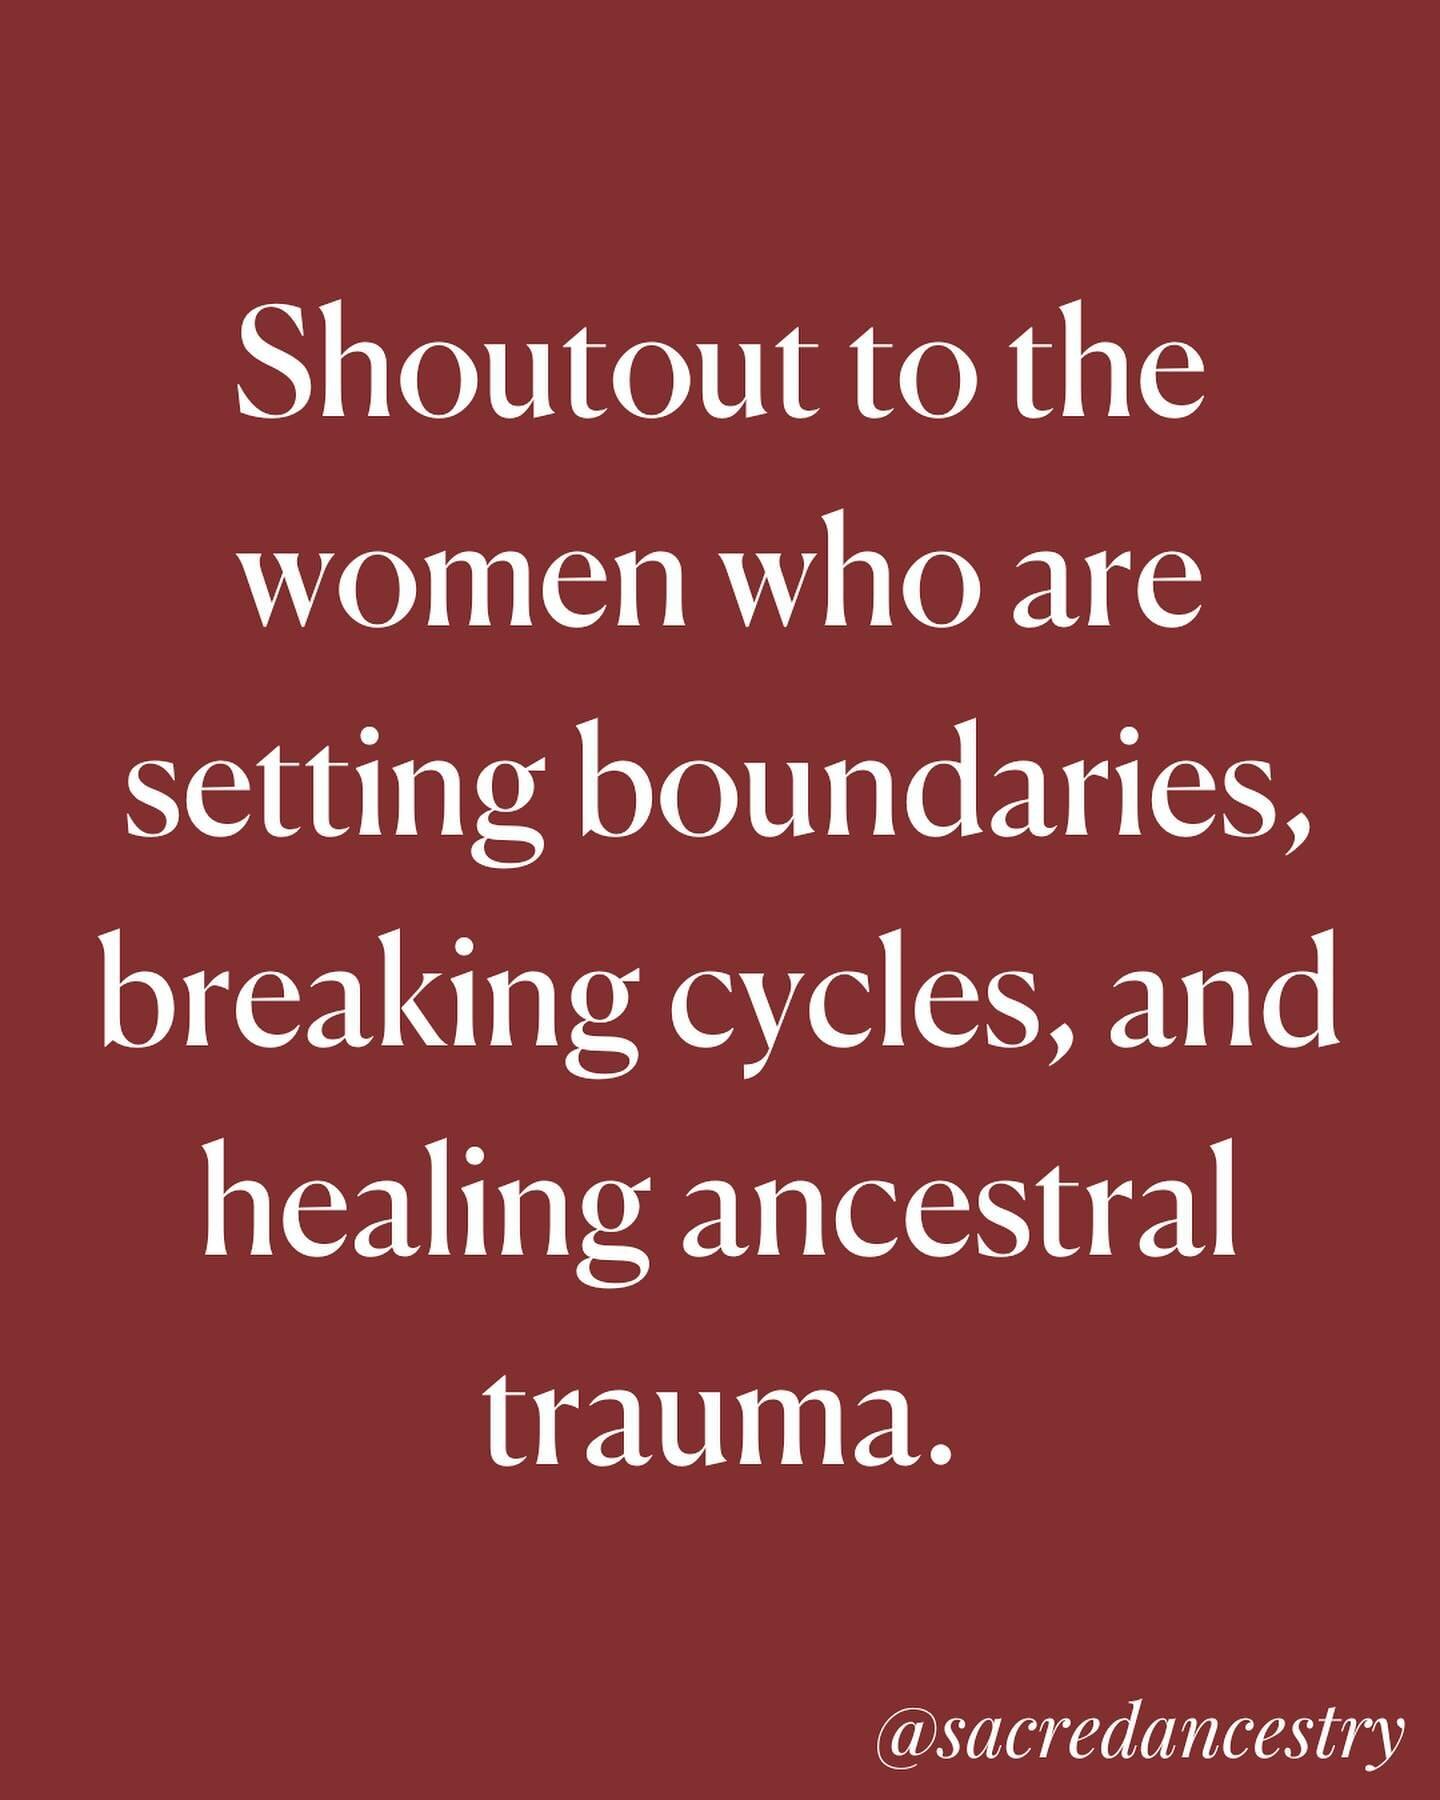 Shoutout to YOU. ❤️&zwj;🔥🌹❤️&zwj;🔥

Woman, you are pure power embodied. 

I honor you for all that you have been through that has brought you to this moment. 

I honor you for ALL the work you have done&hellip; not just what can be seen, but what 